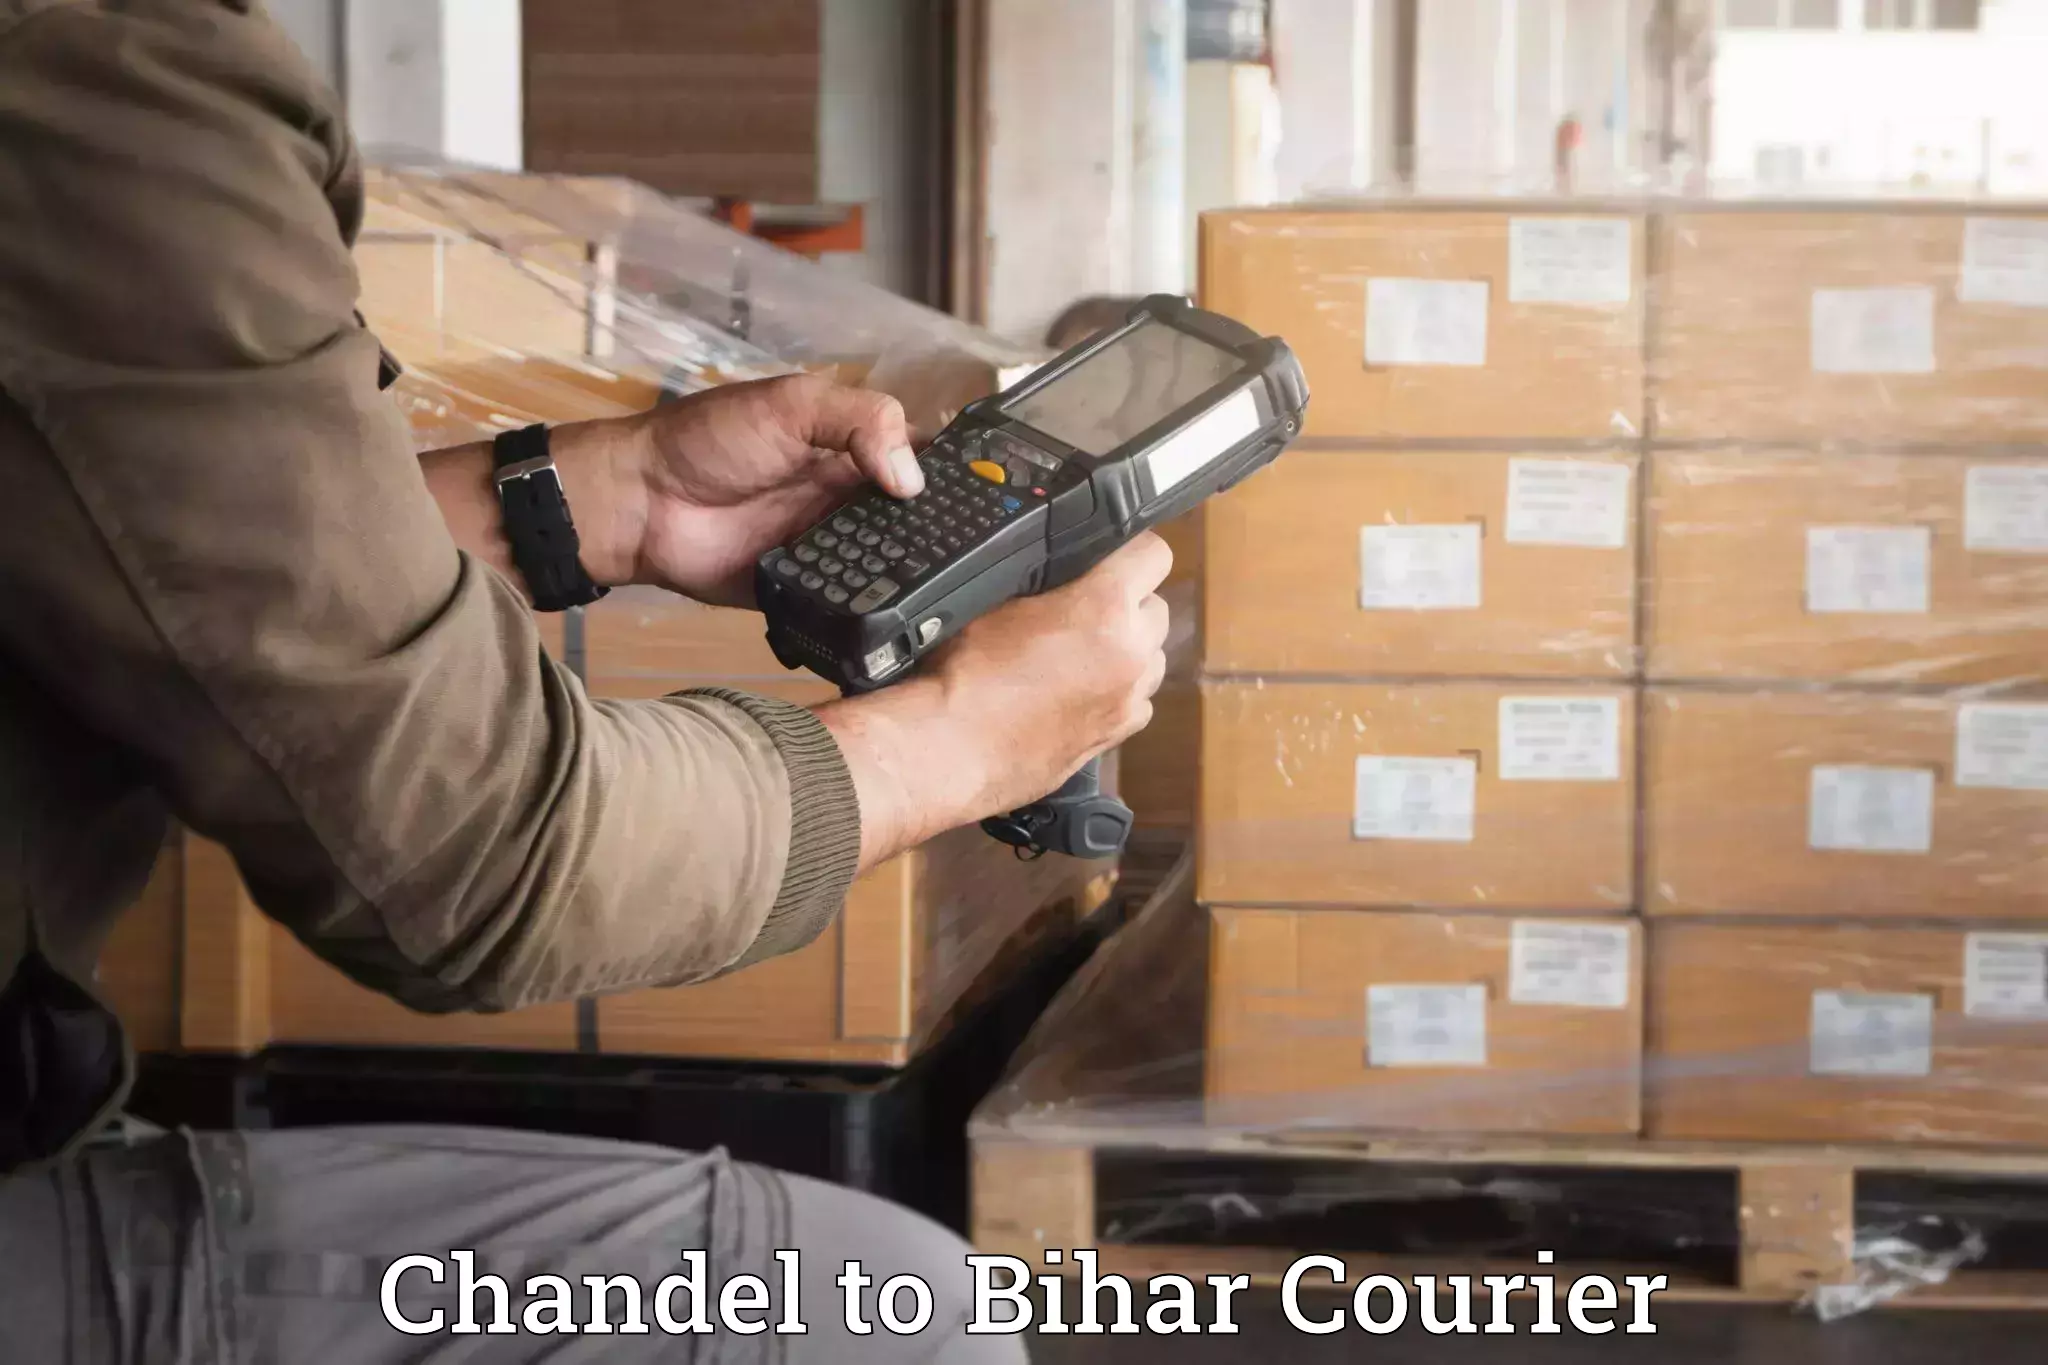 Luggage forwarding service Chandel to Rohtas